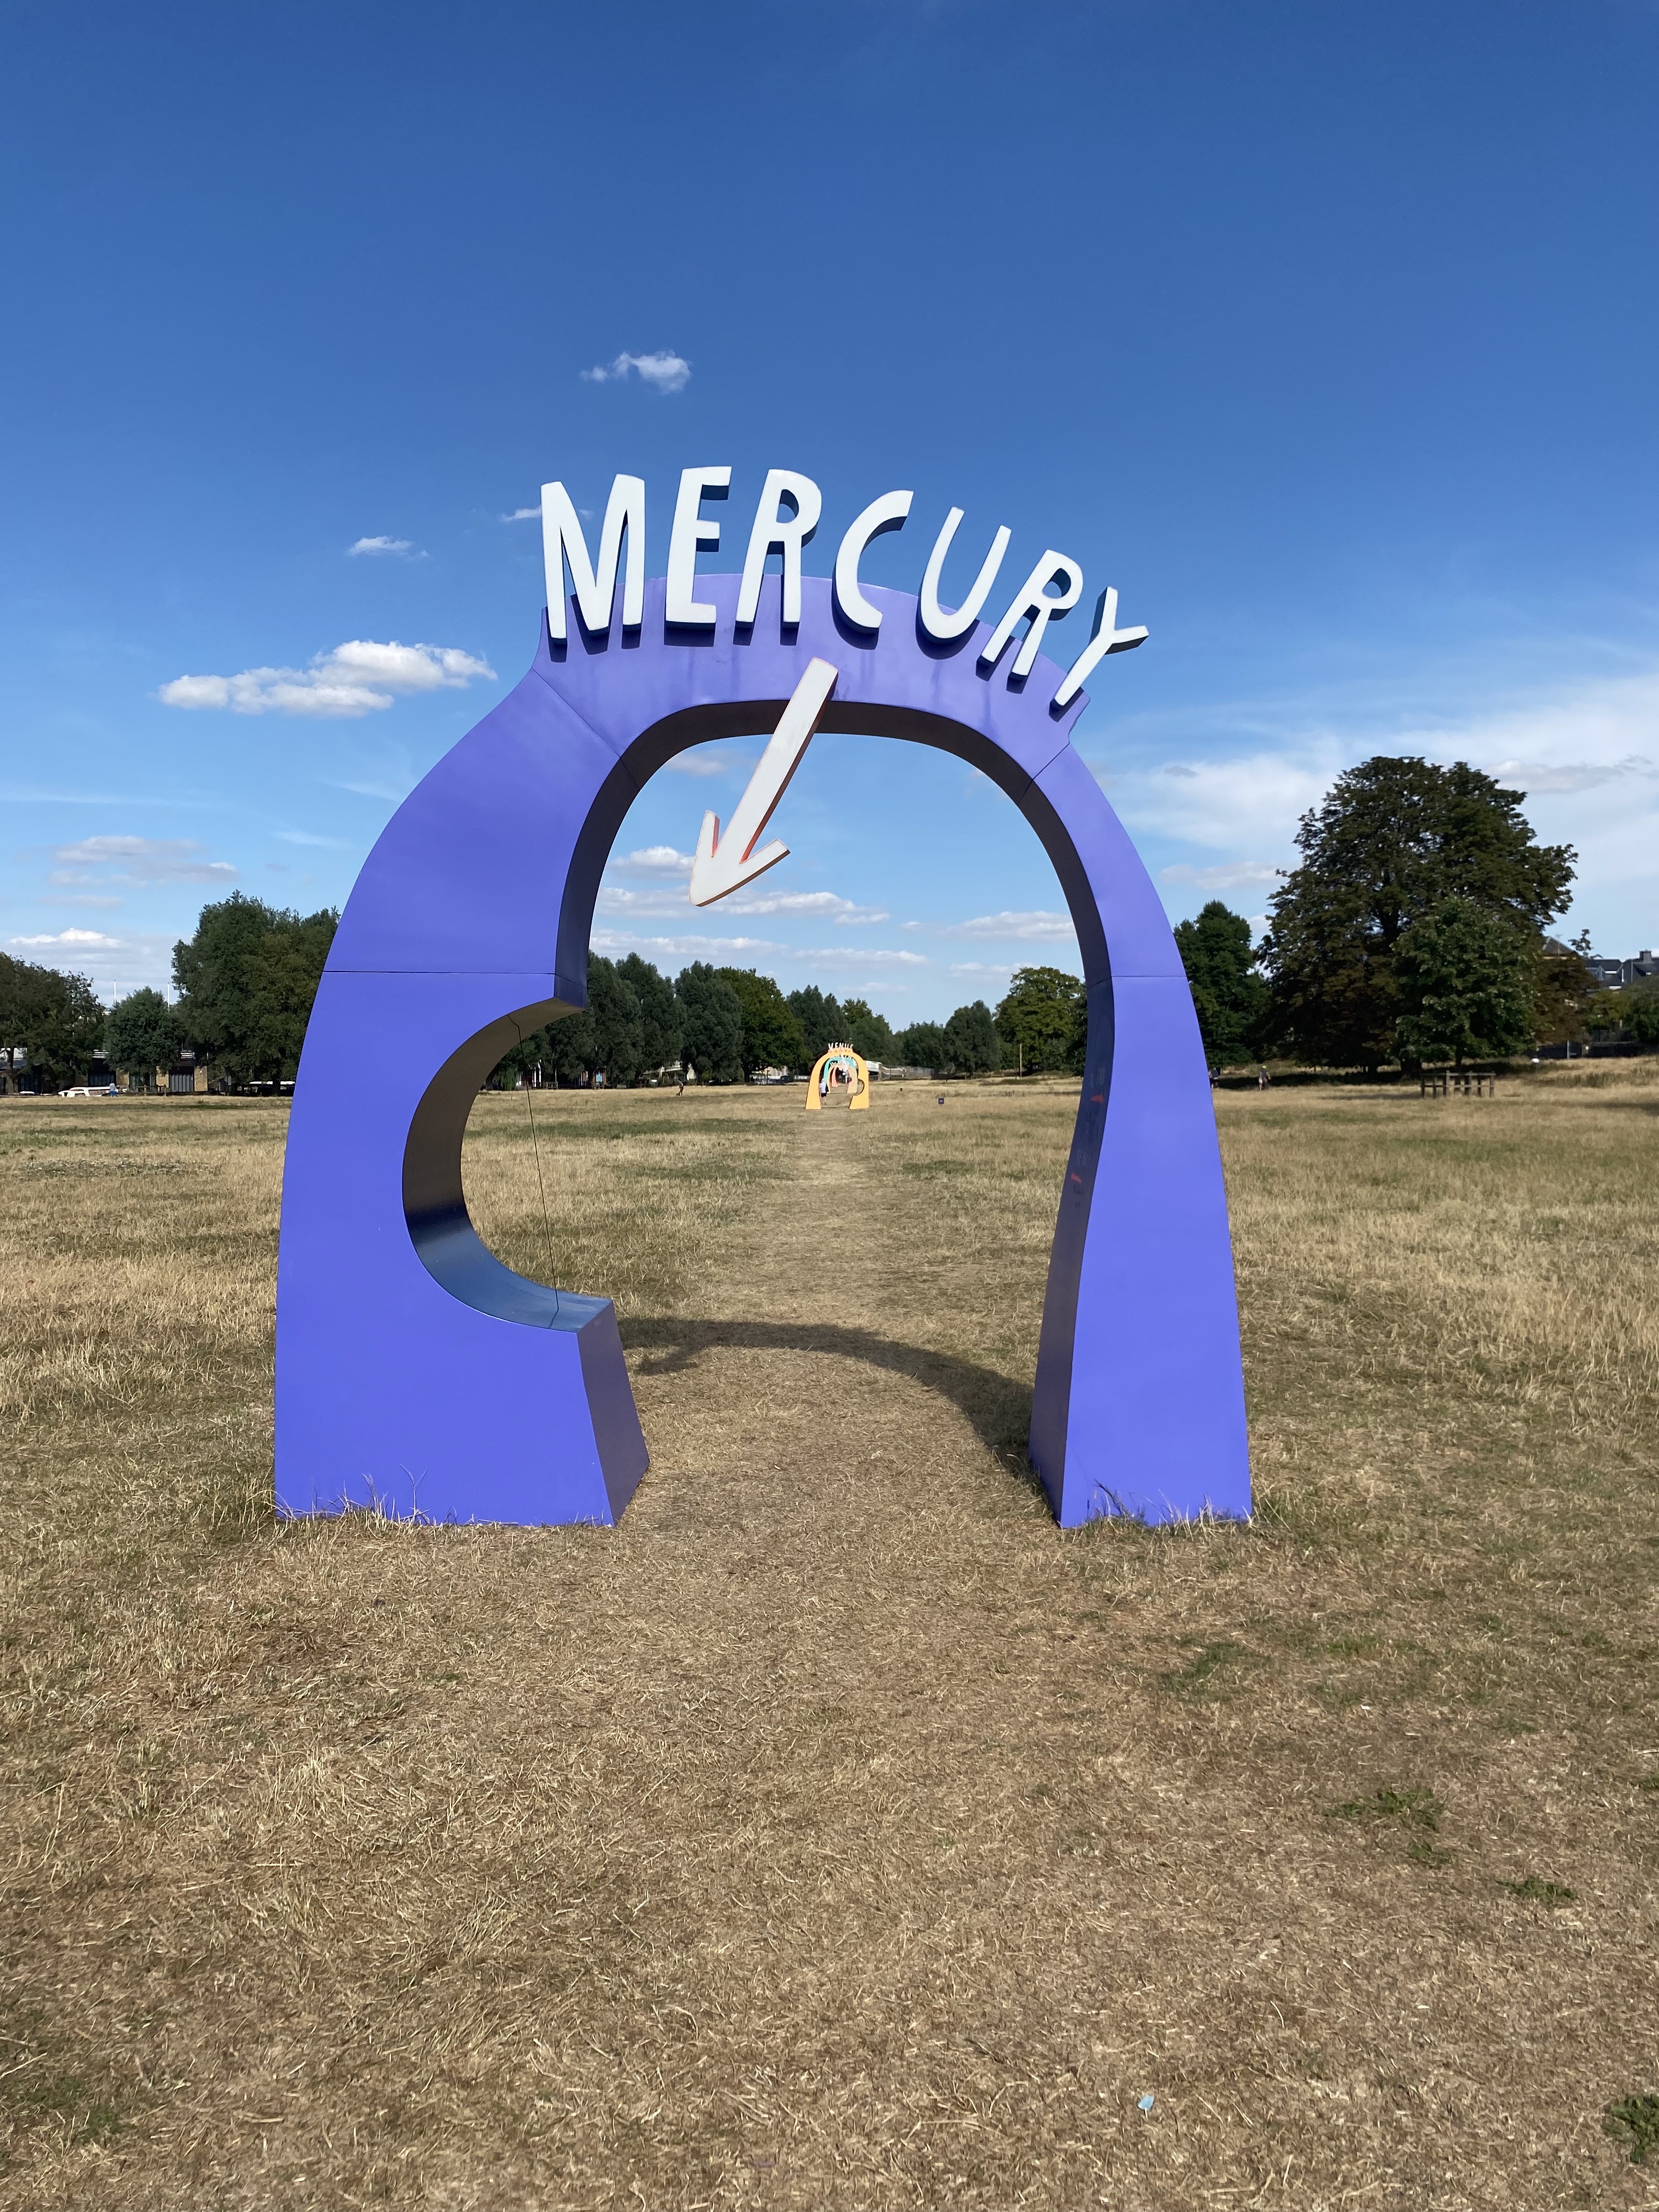 Purple arch with the word "Mercury" on top pointing to a tiny pea-sized planet